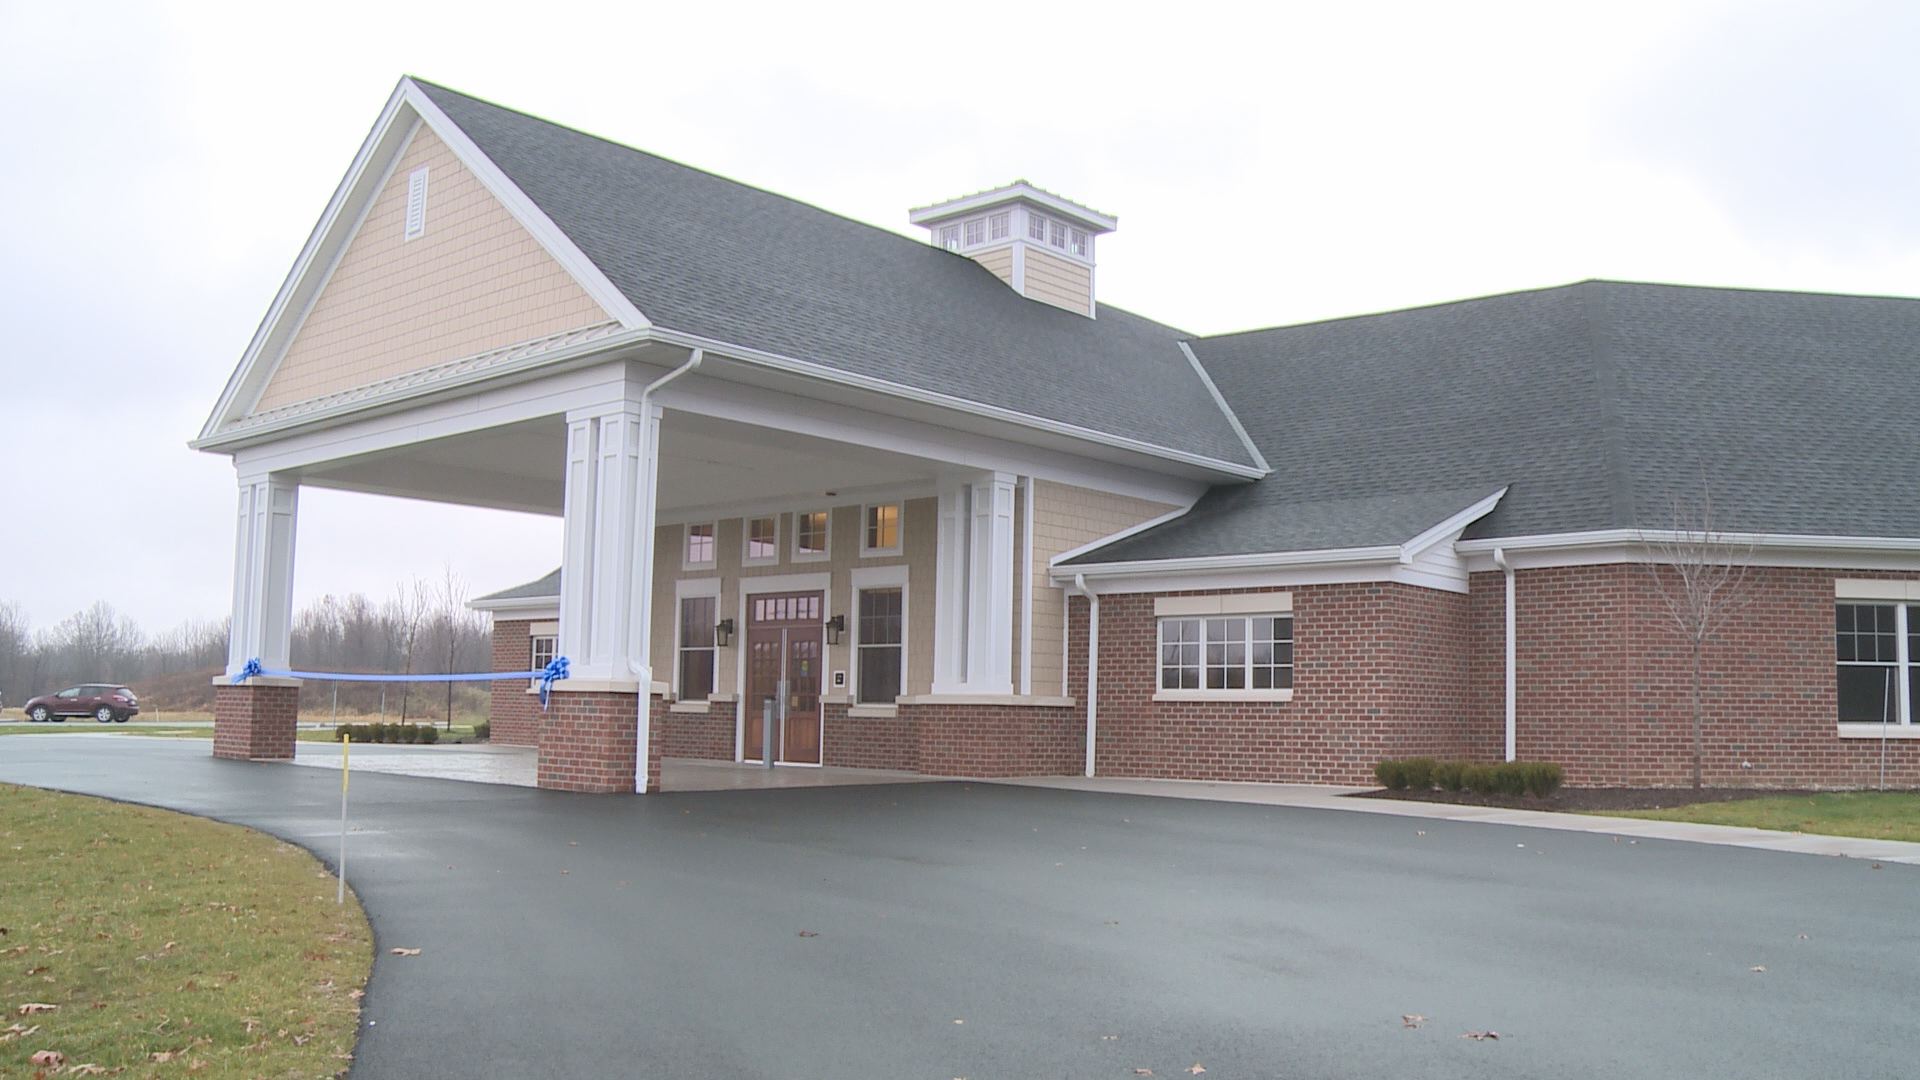 Memory care assisted living facility opens in Trumbull County - WFMJ.com